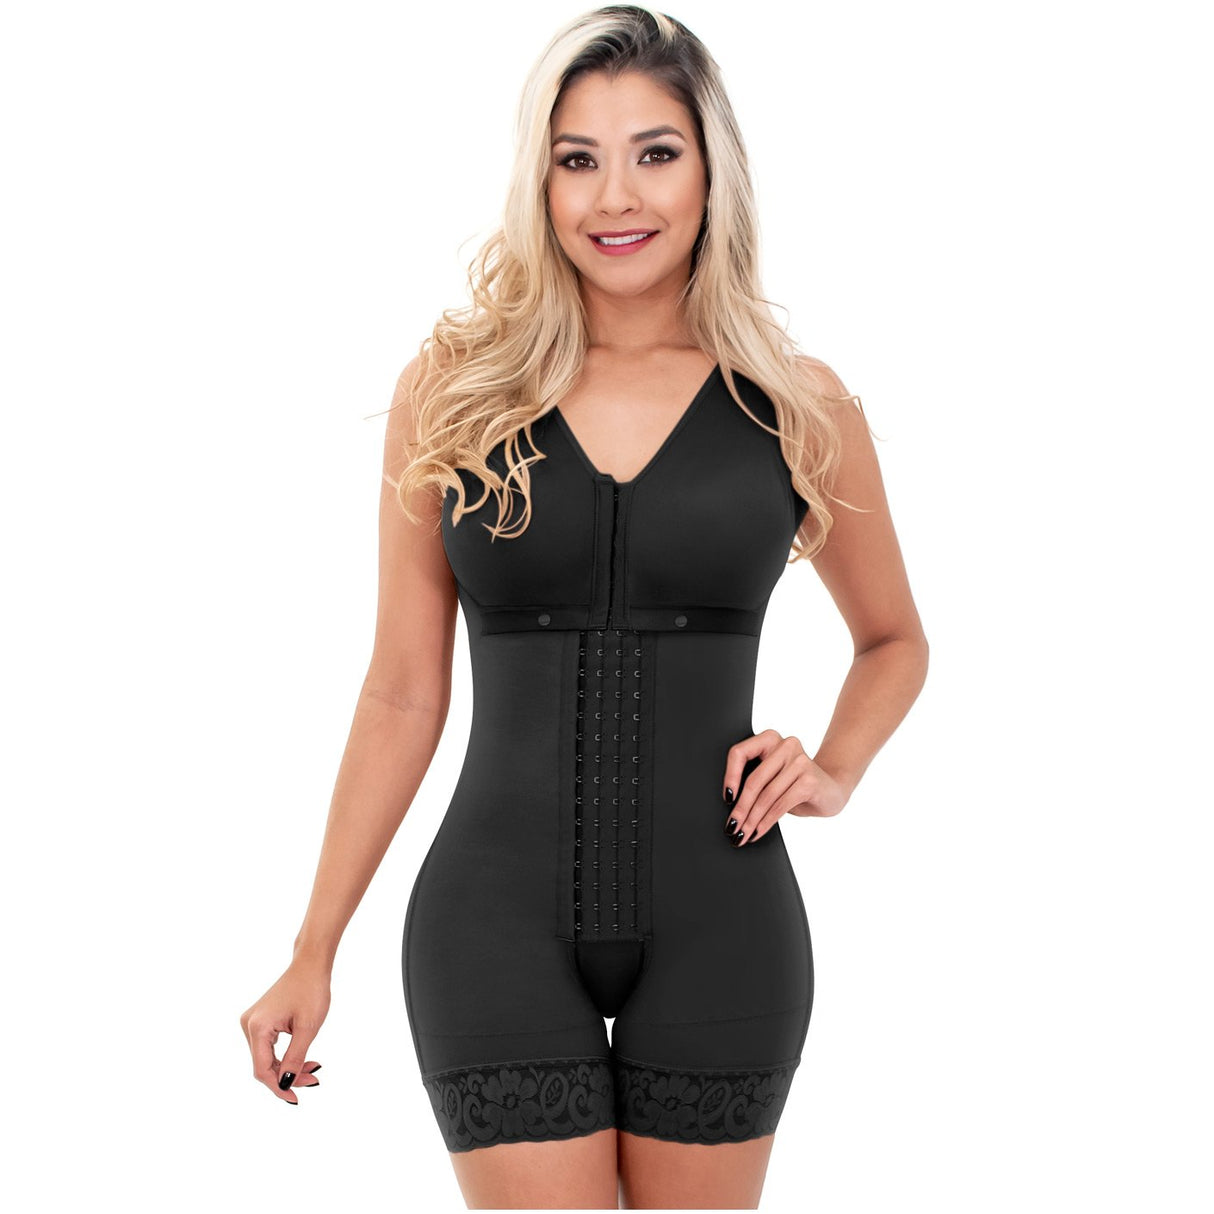 Colombian girdle for women with small waist and wide hips